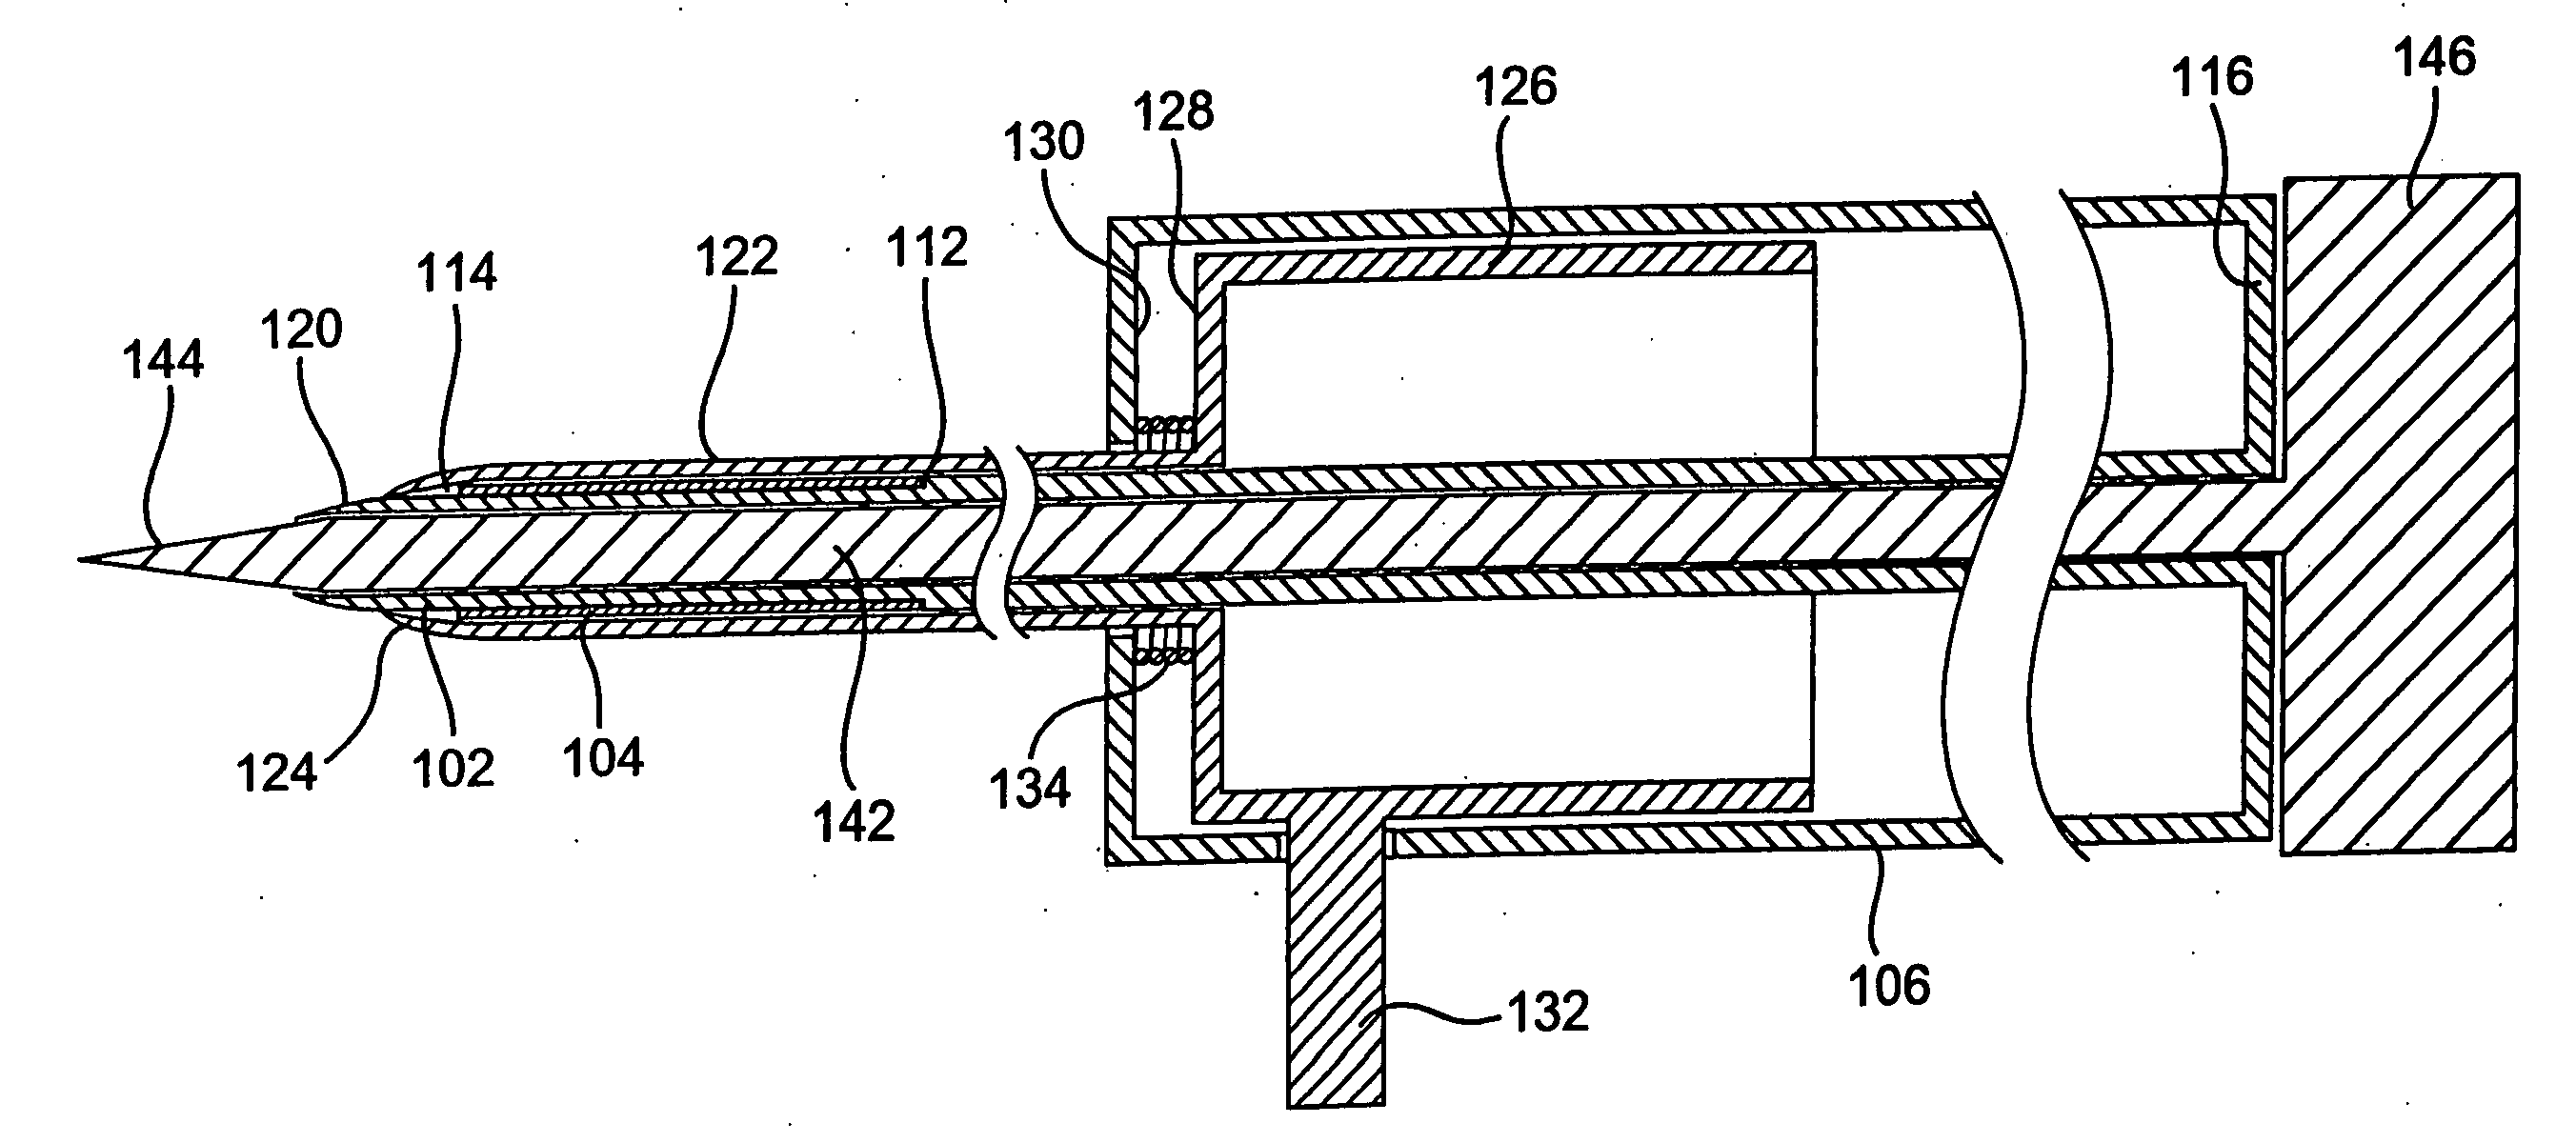 Delivering a conduit into a heart wall to place a coronary vessel in communication with a heart chamber and removing tissue from the vessel or heart wall to facilitate such communication